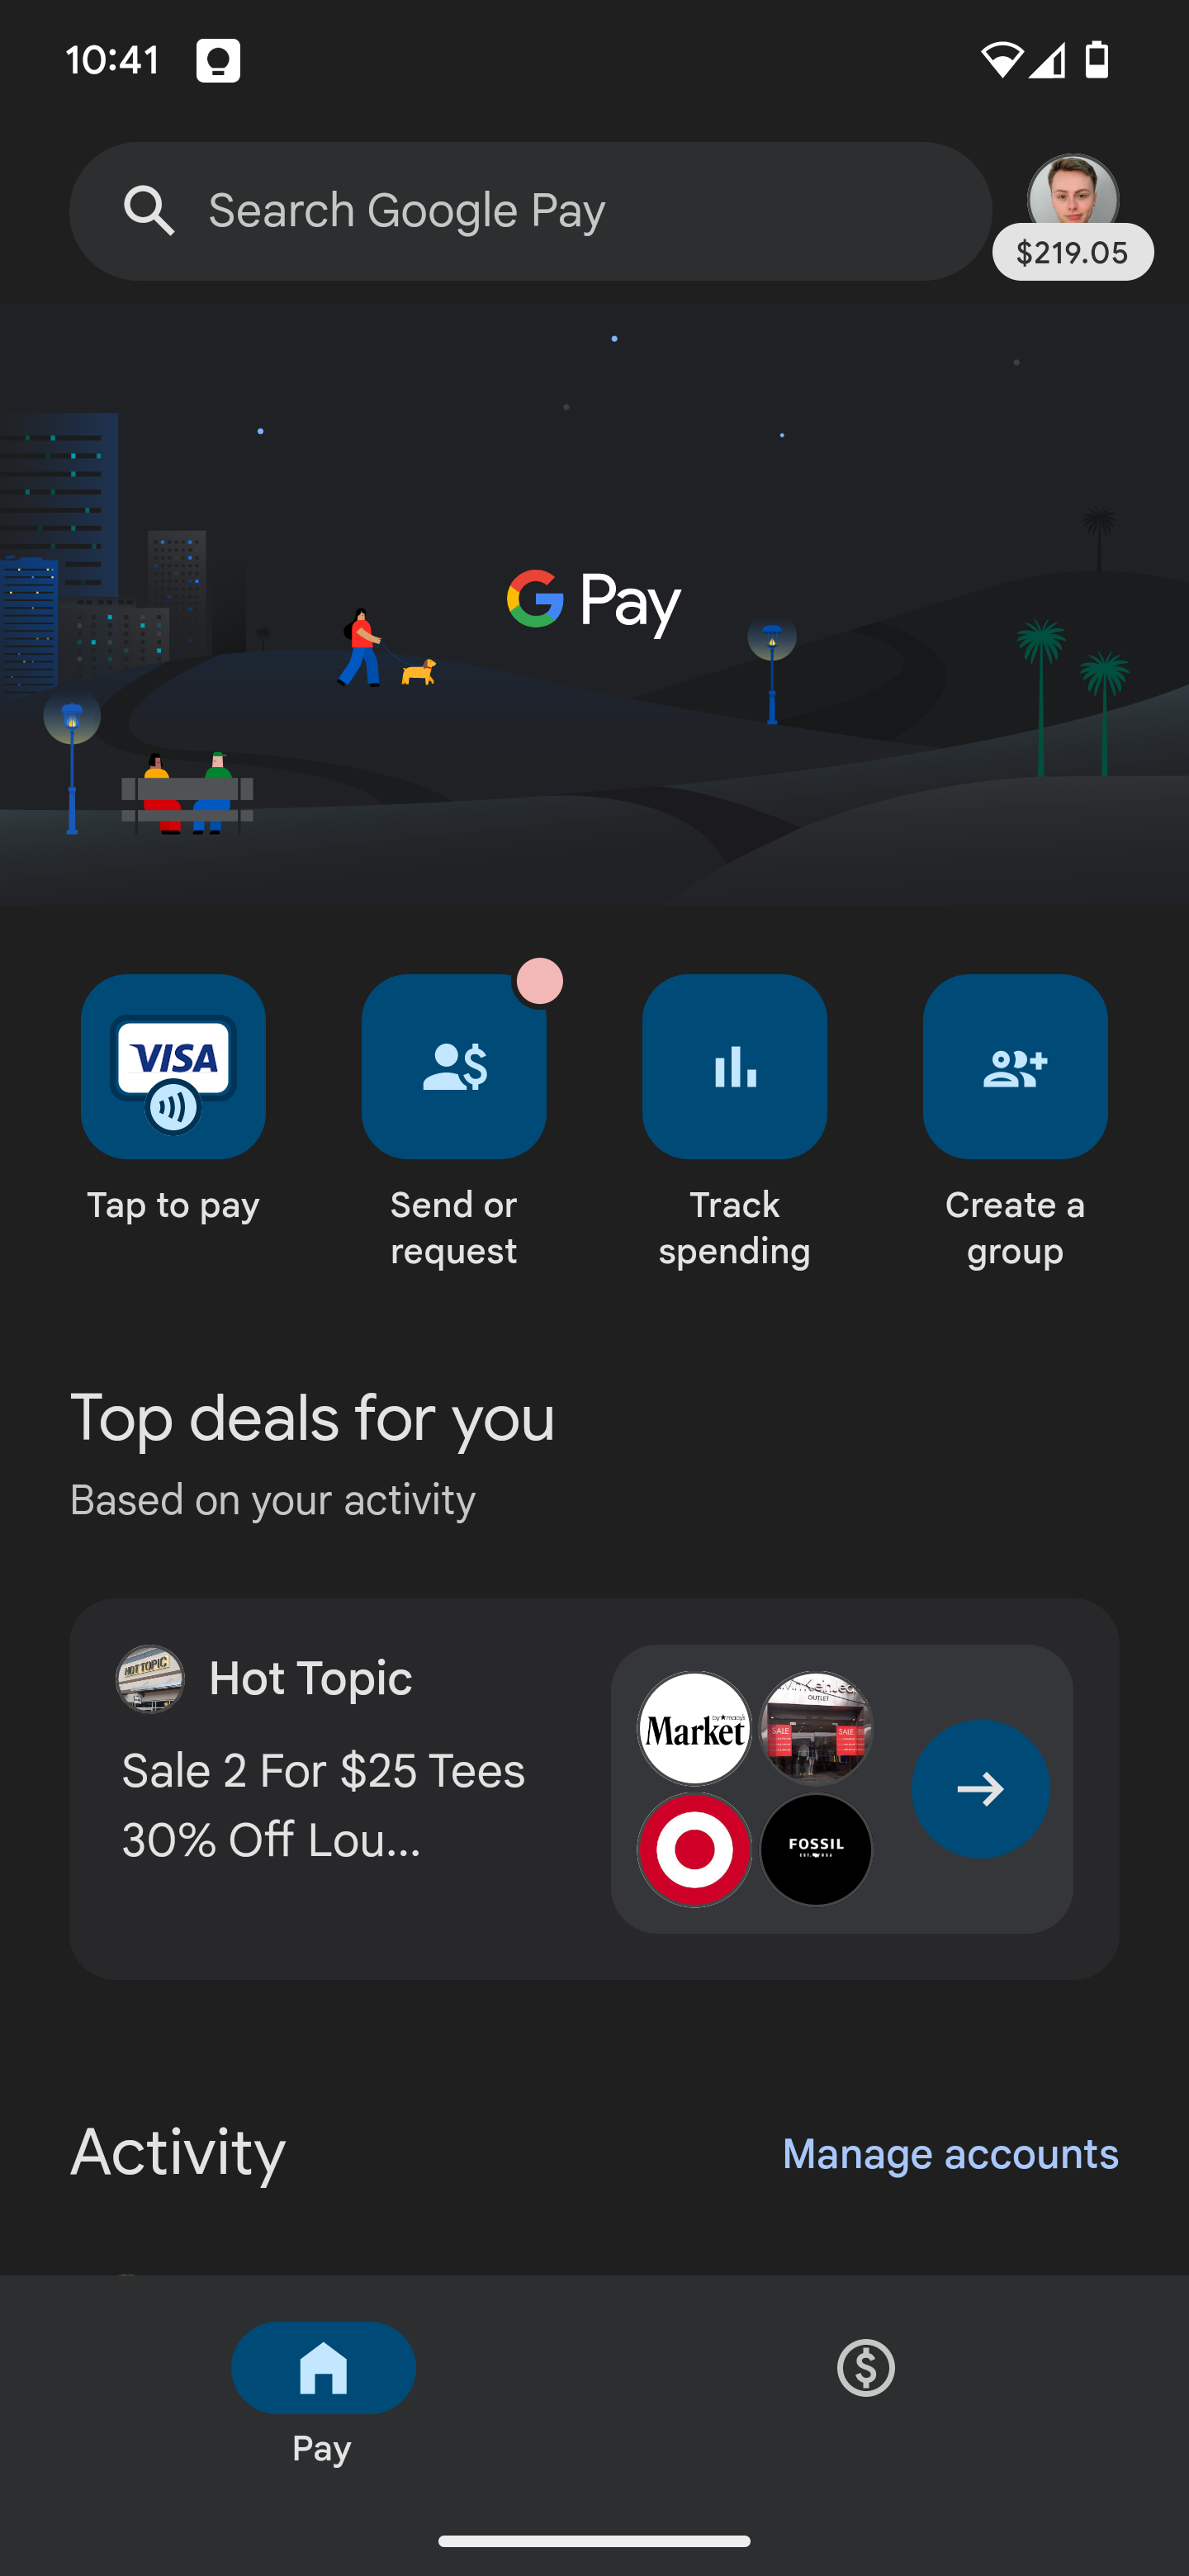 google-pay-top-deals-for-you-1